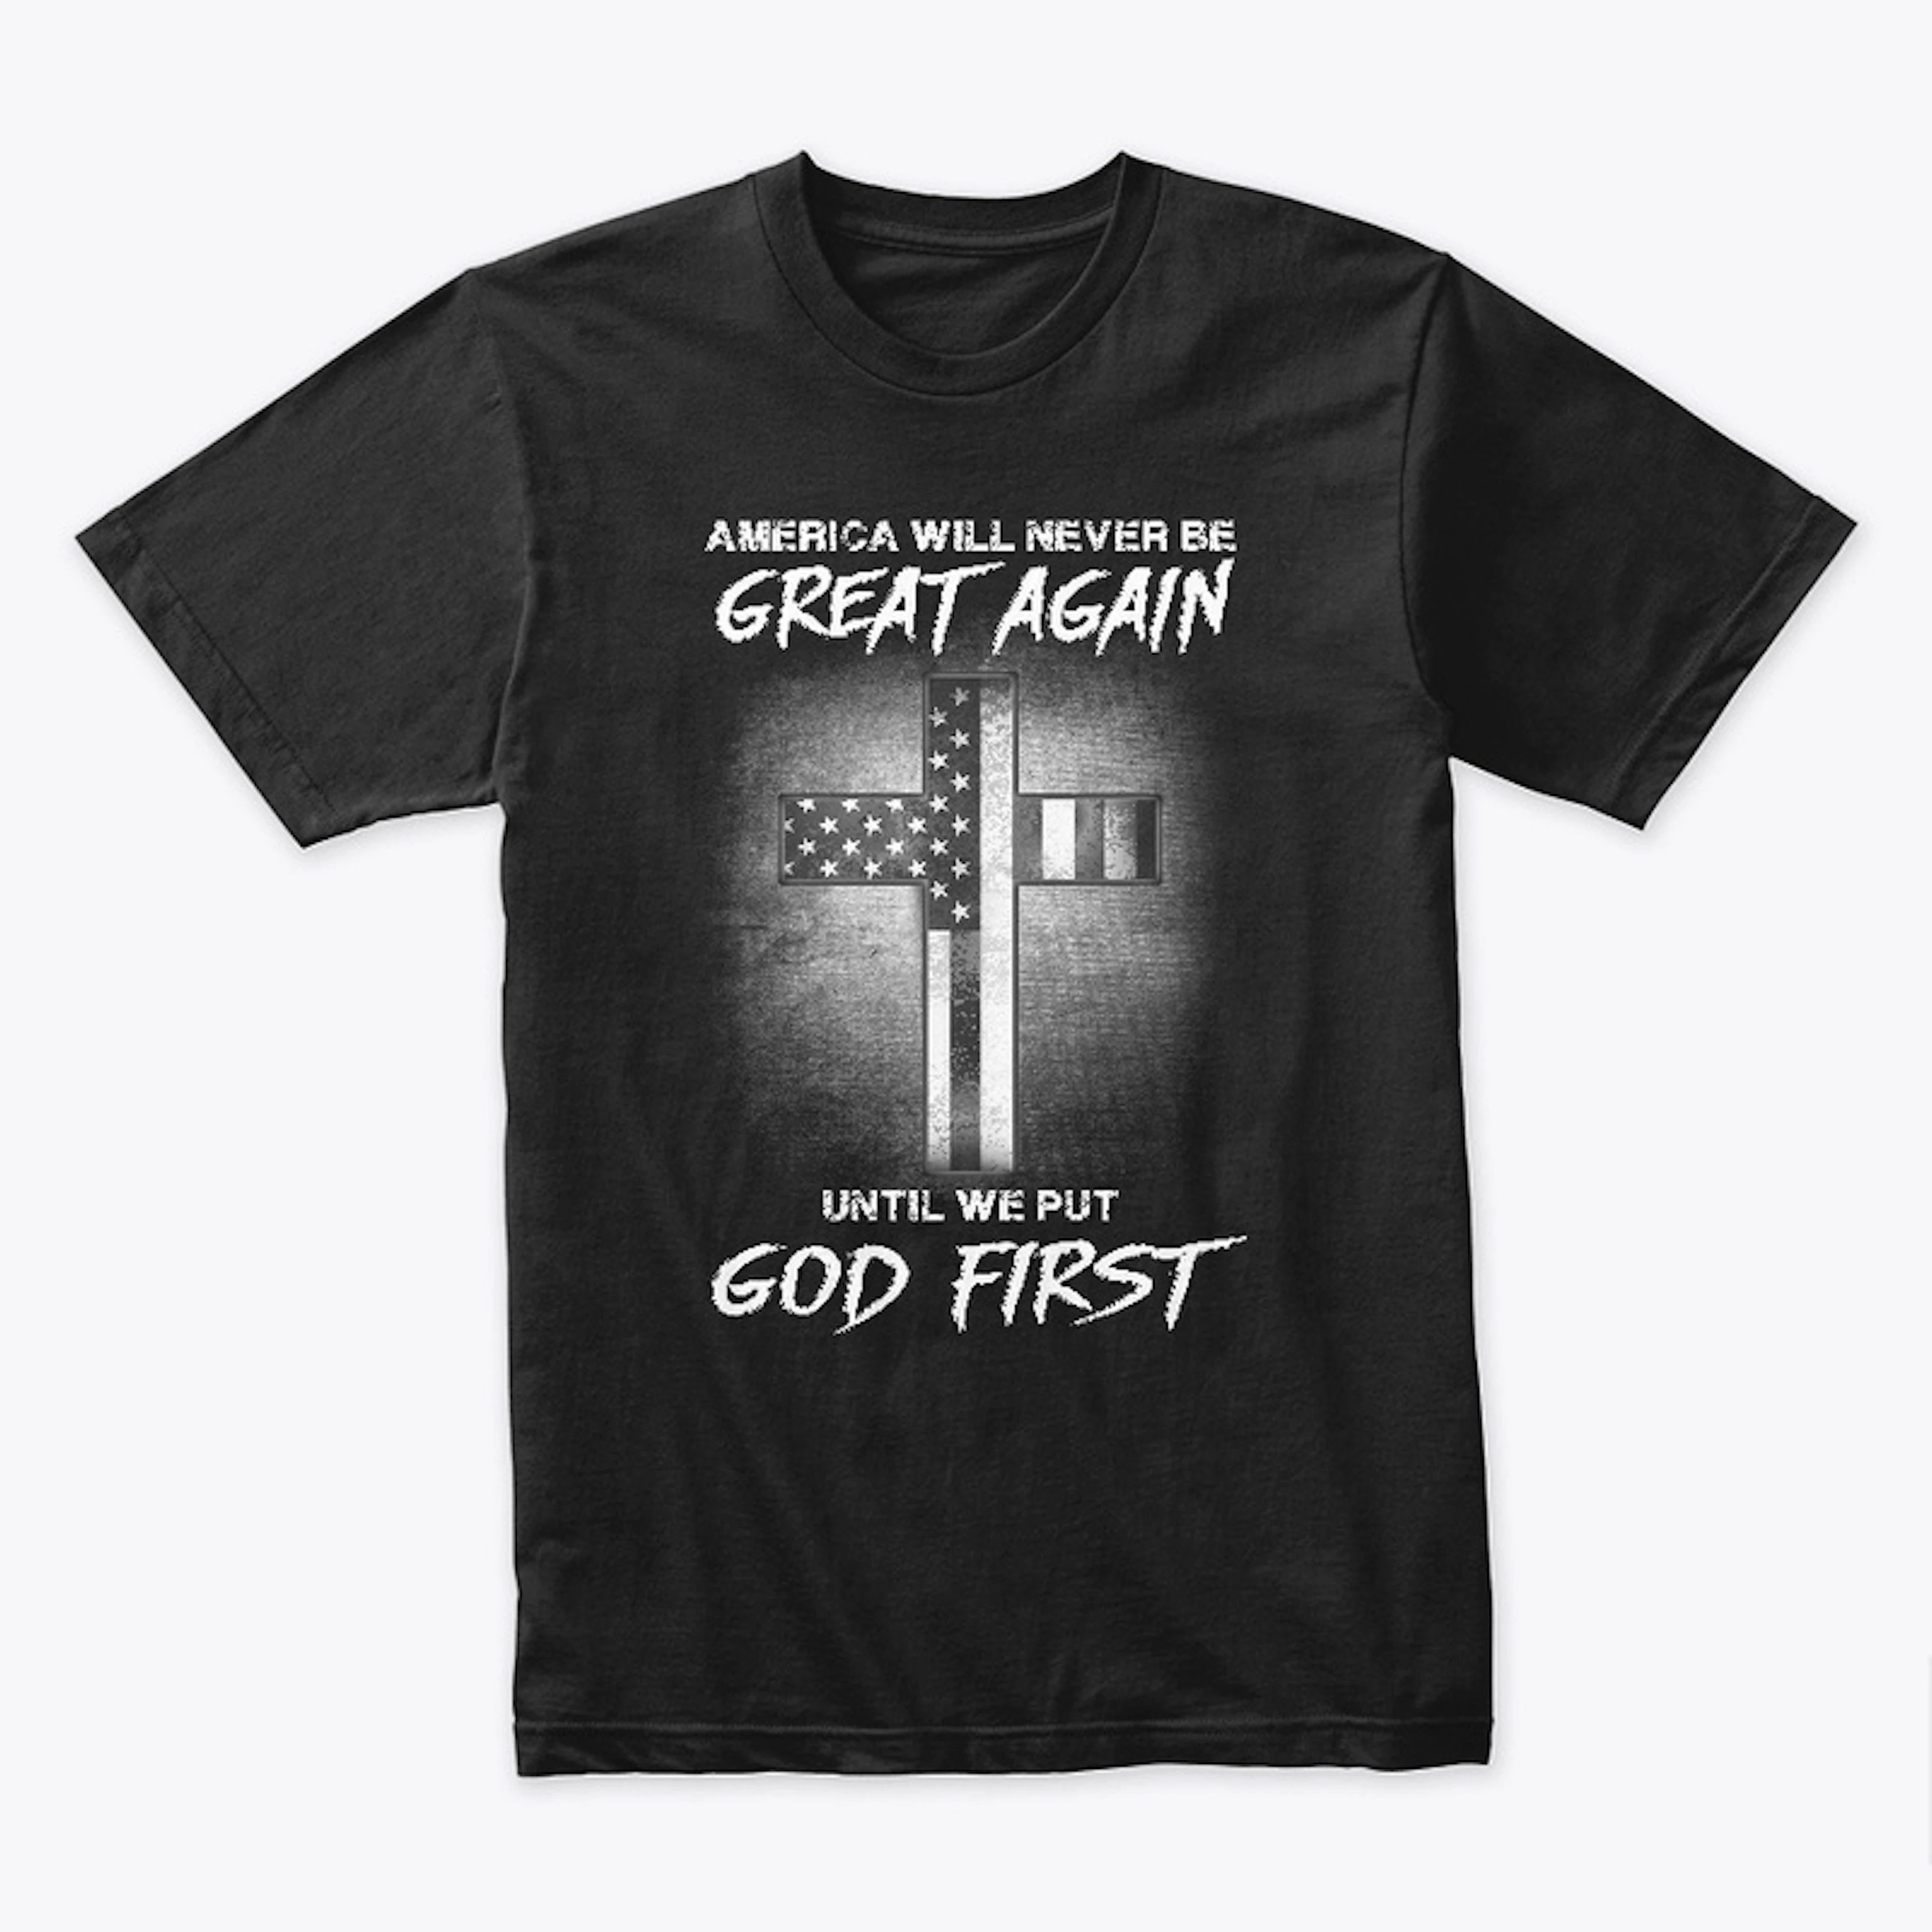 To Save America We Must Put GOD FIRST!